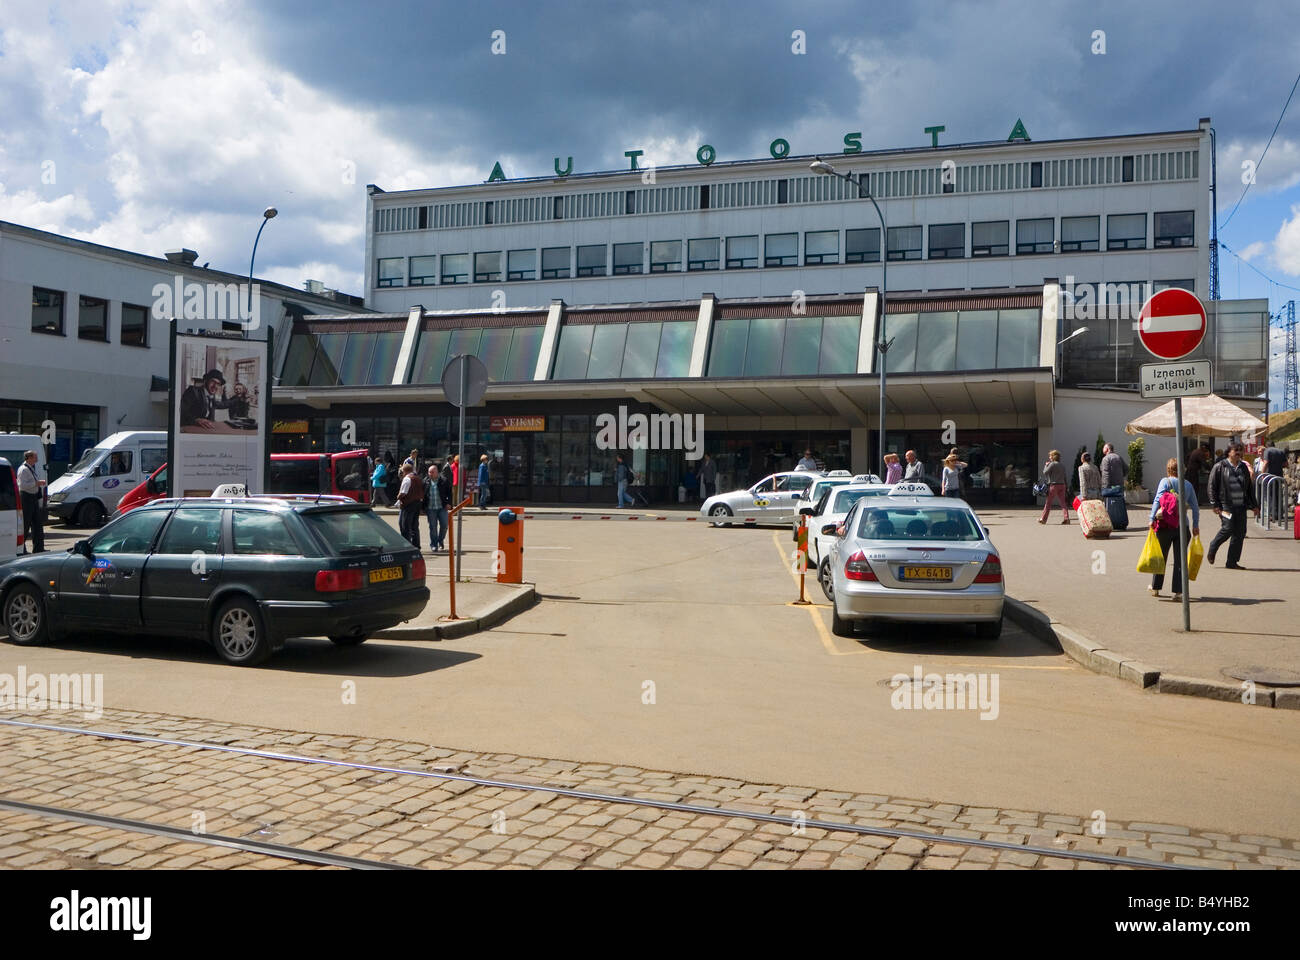 Riga bus station front view Stock Photo - Alamy